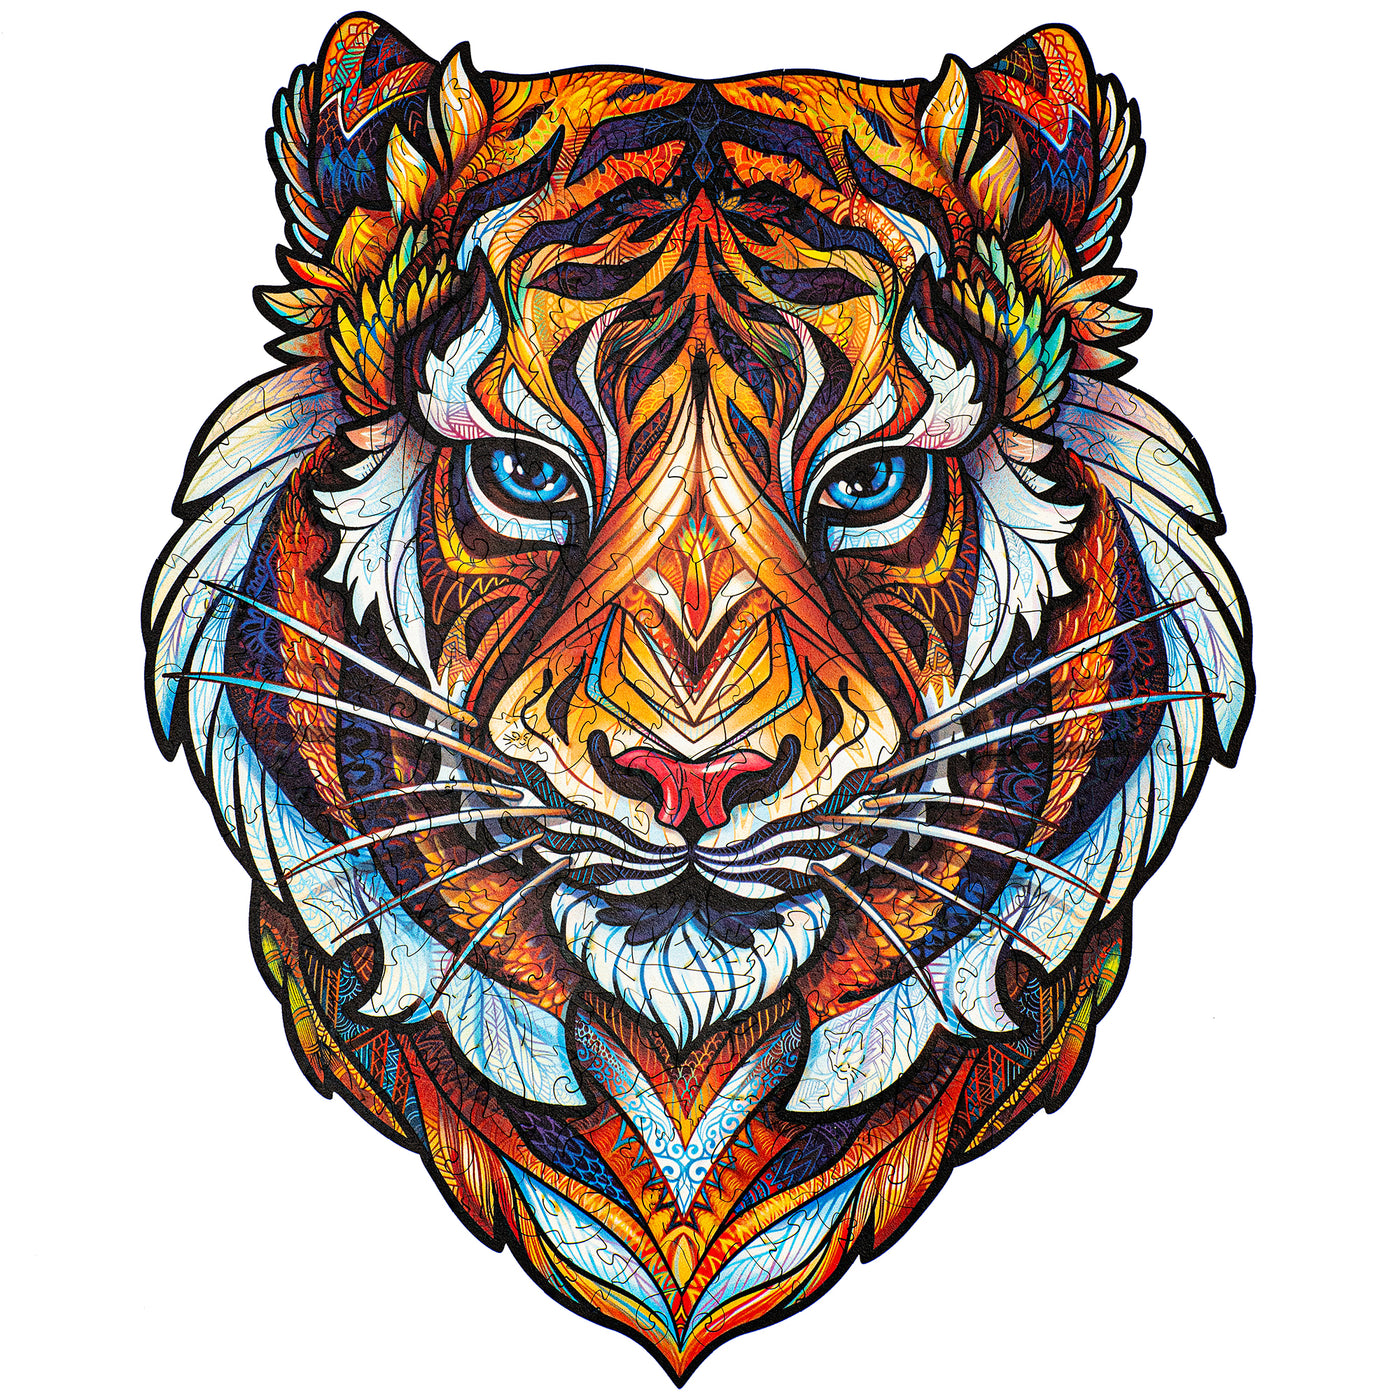 Lovely Tiger | Wooden Jigsaw Puzzle